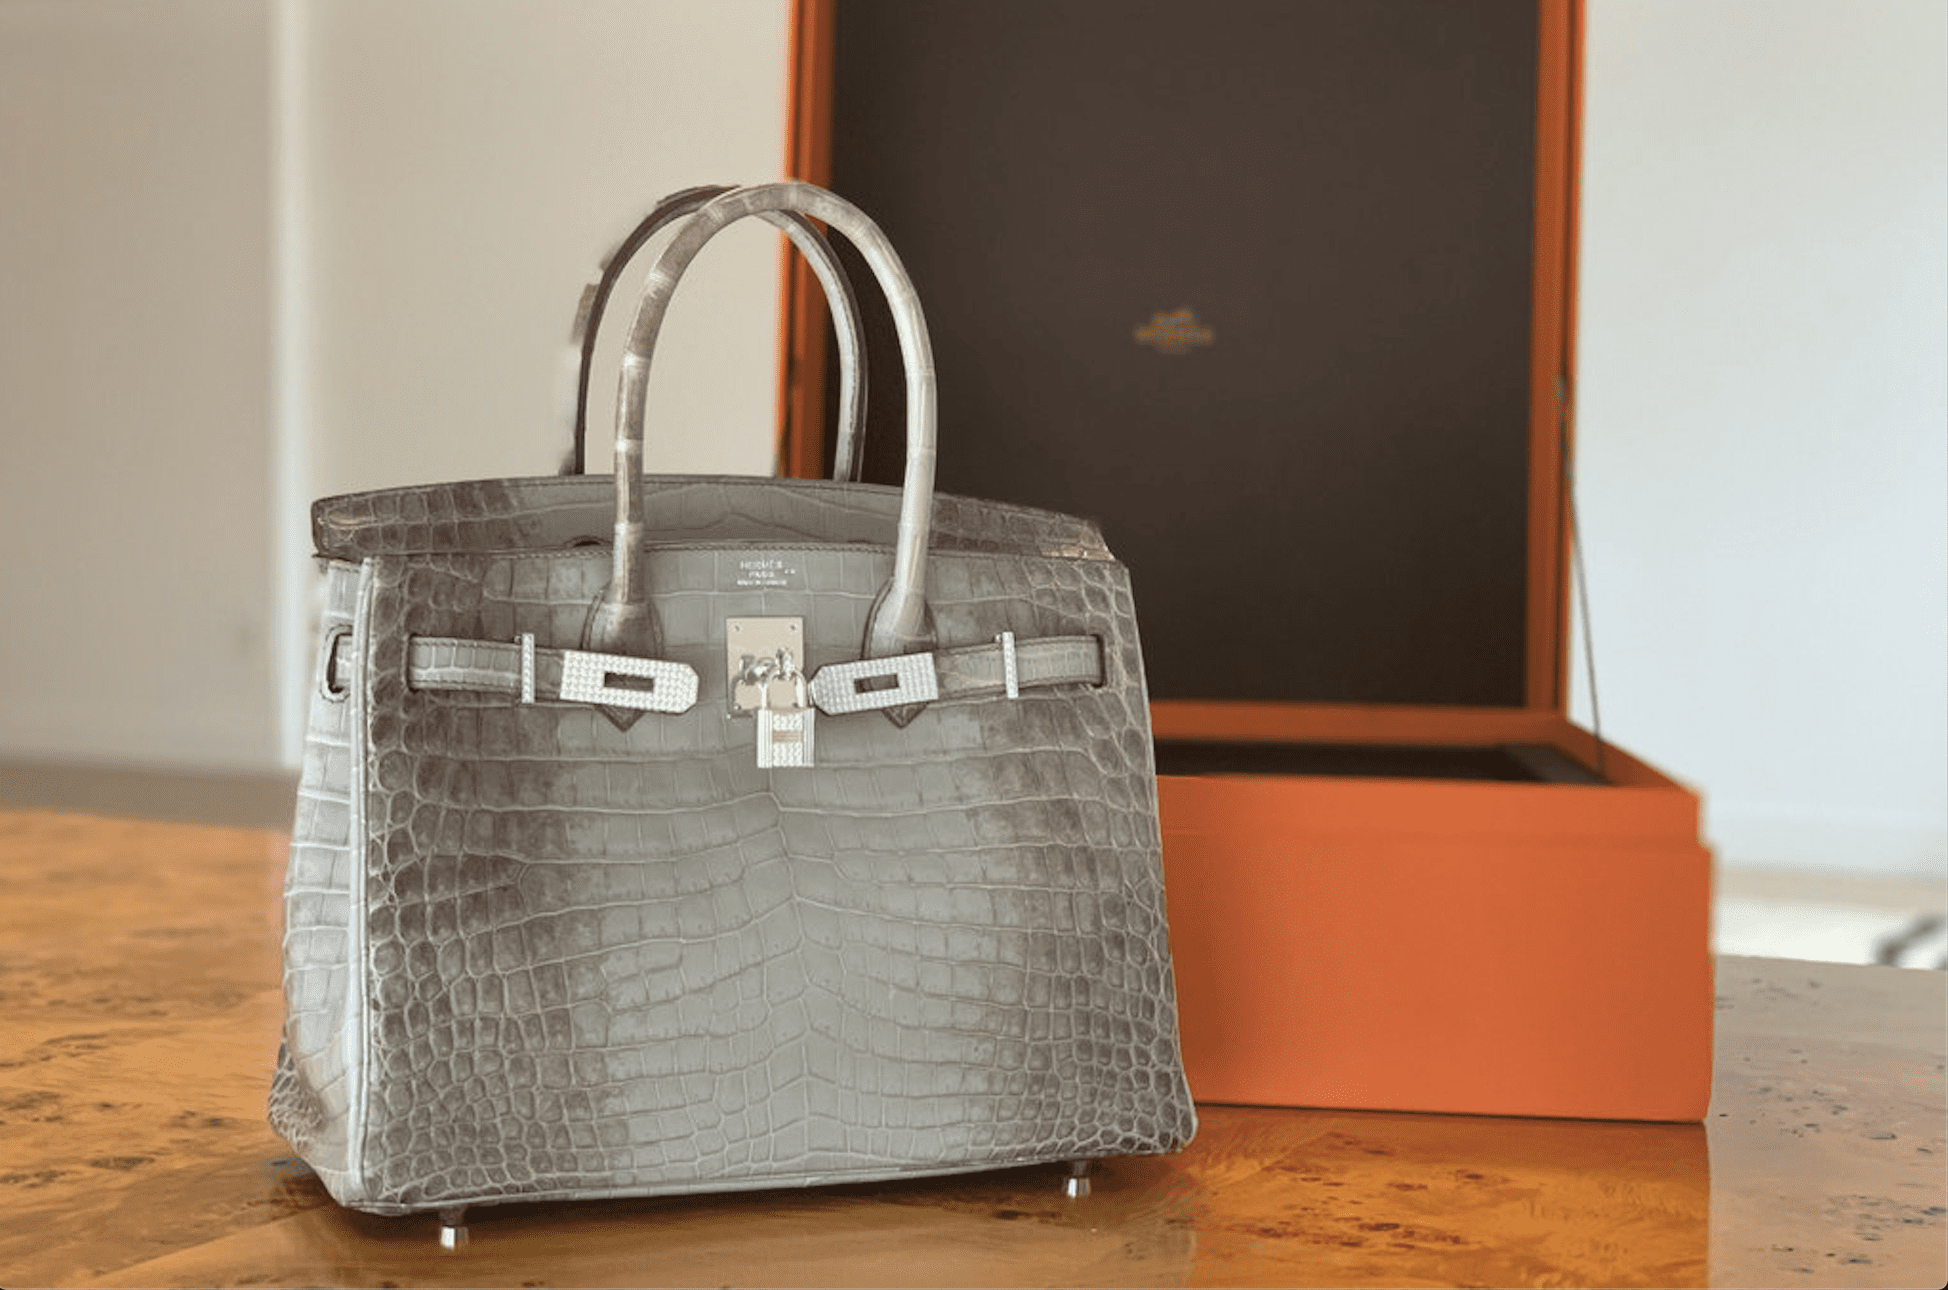 5 of the Most Expensive Handbags Ever Auctioned by Christies